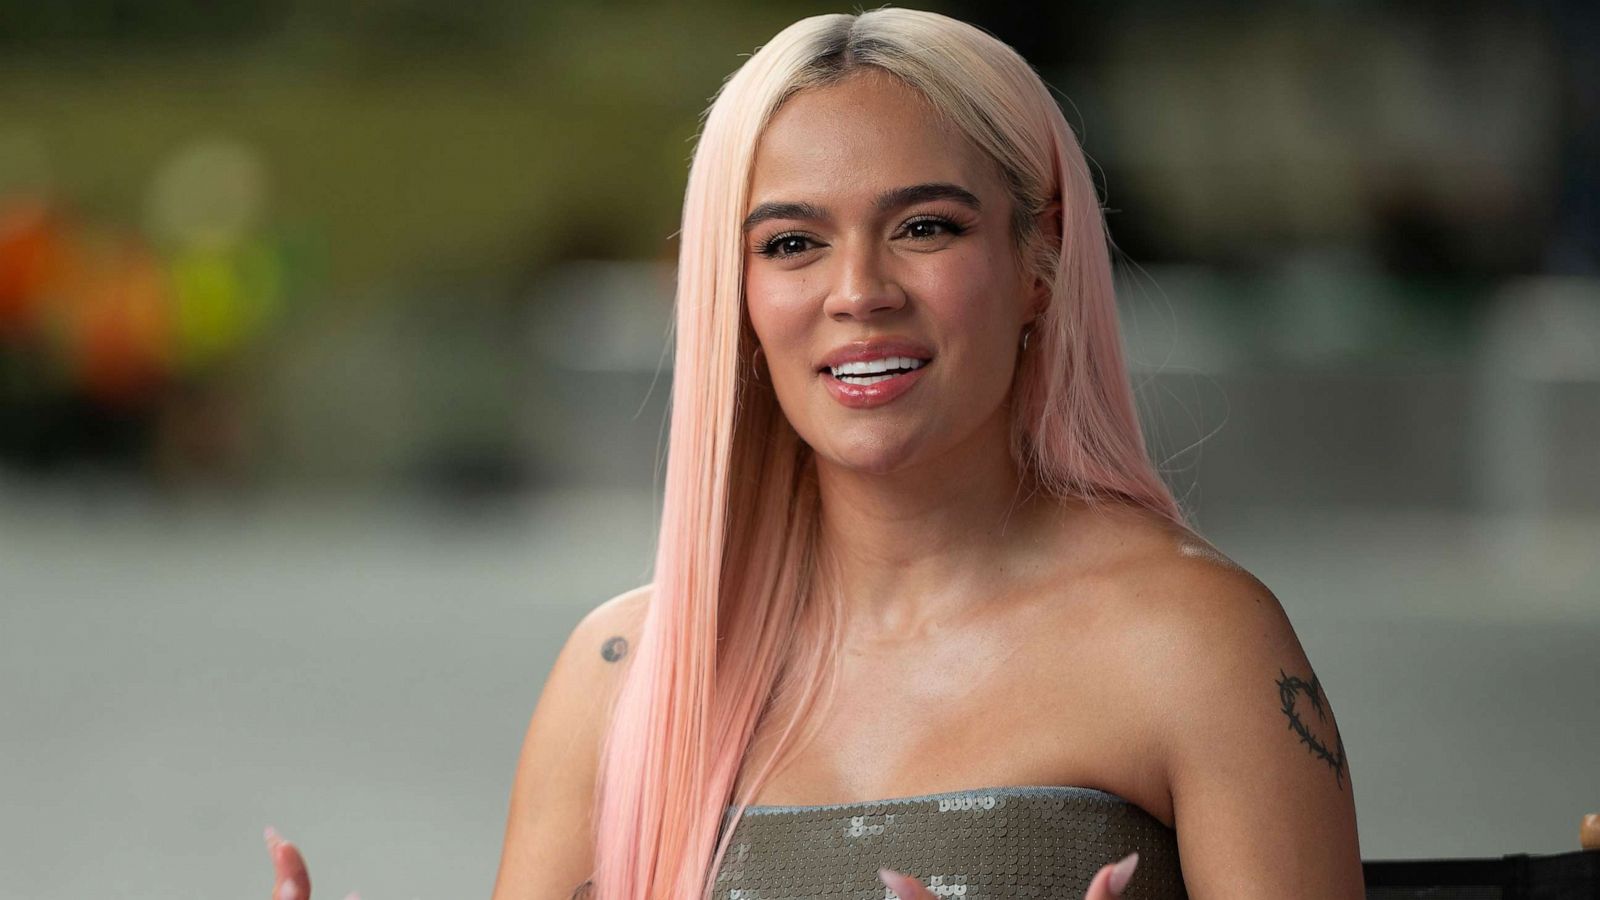 Karol G, Bad Bunny and more on breaking barriers in Latin music - ABC News